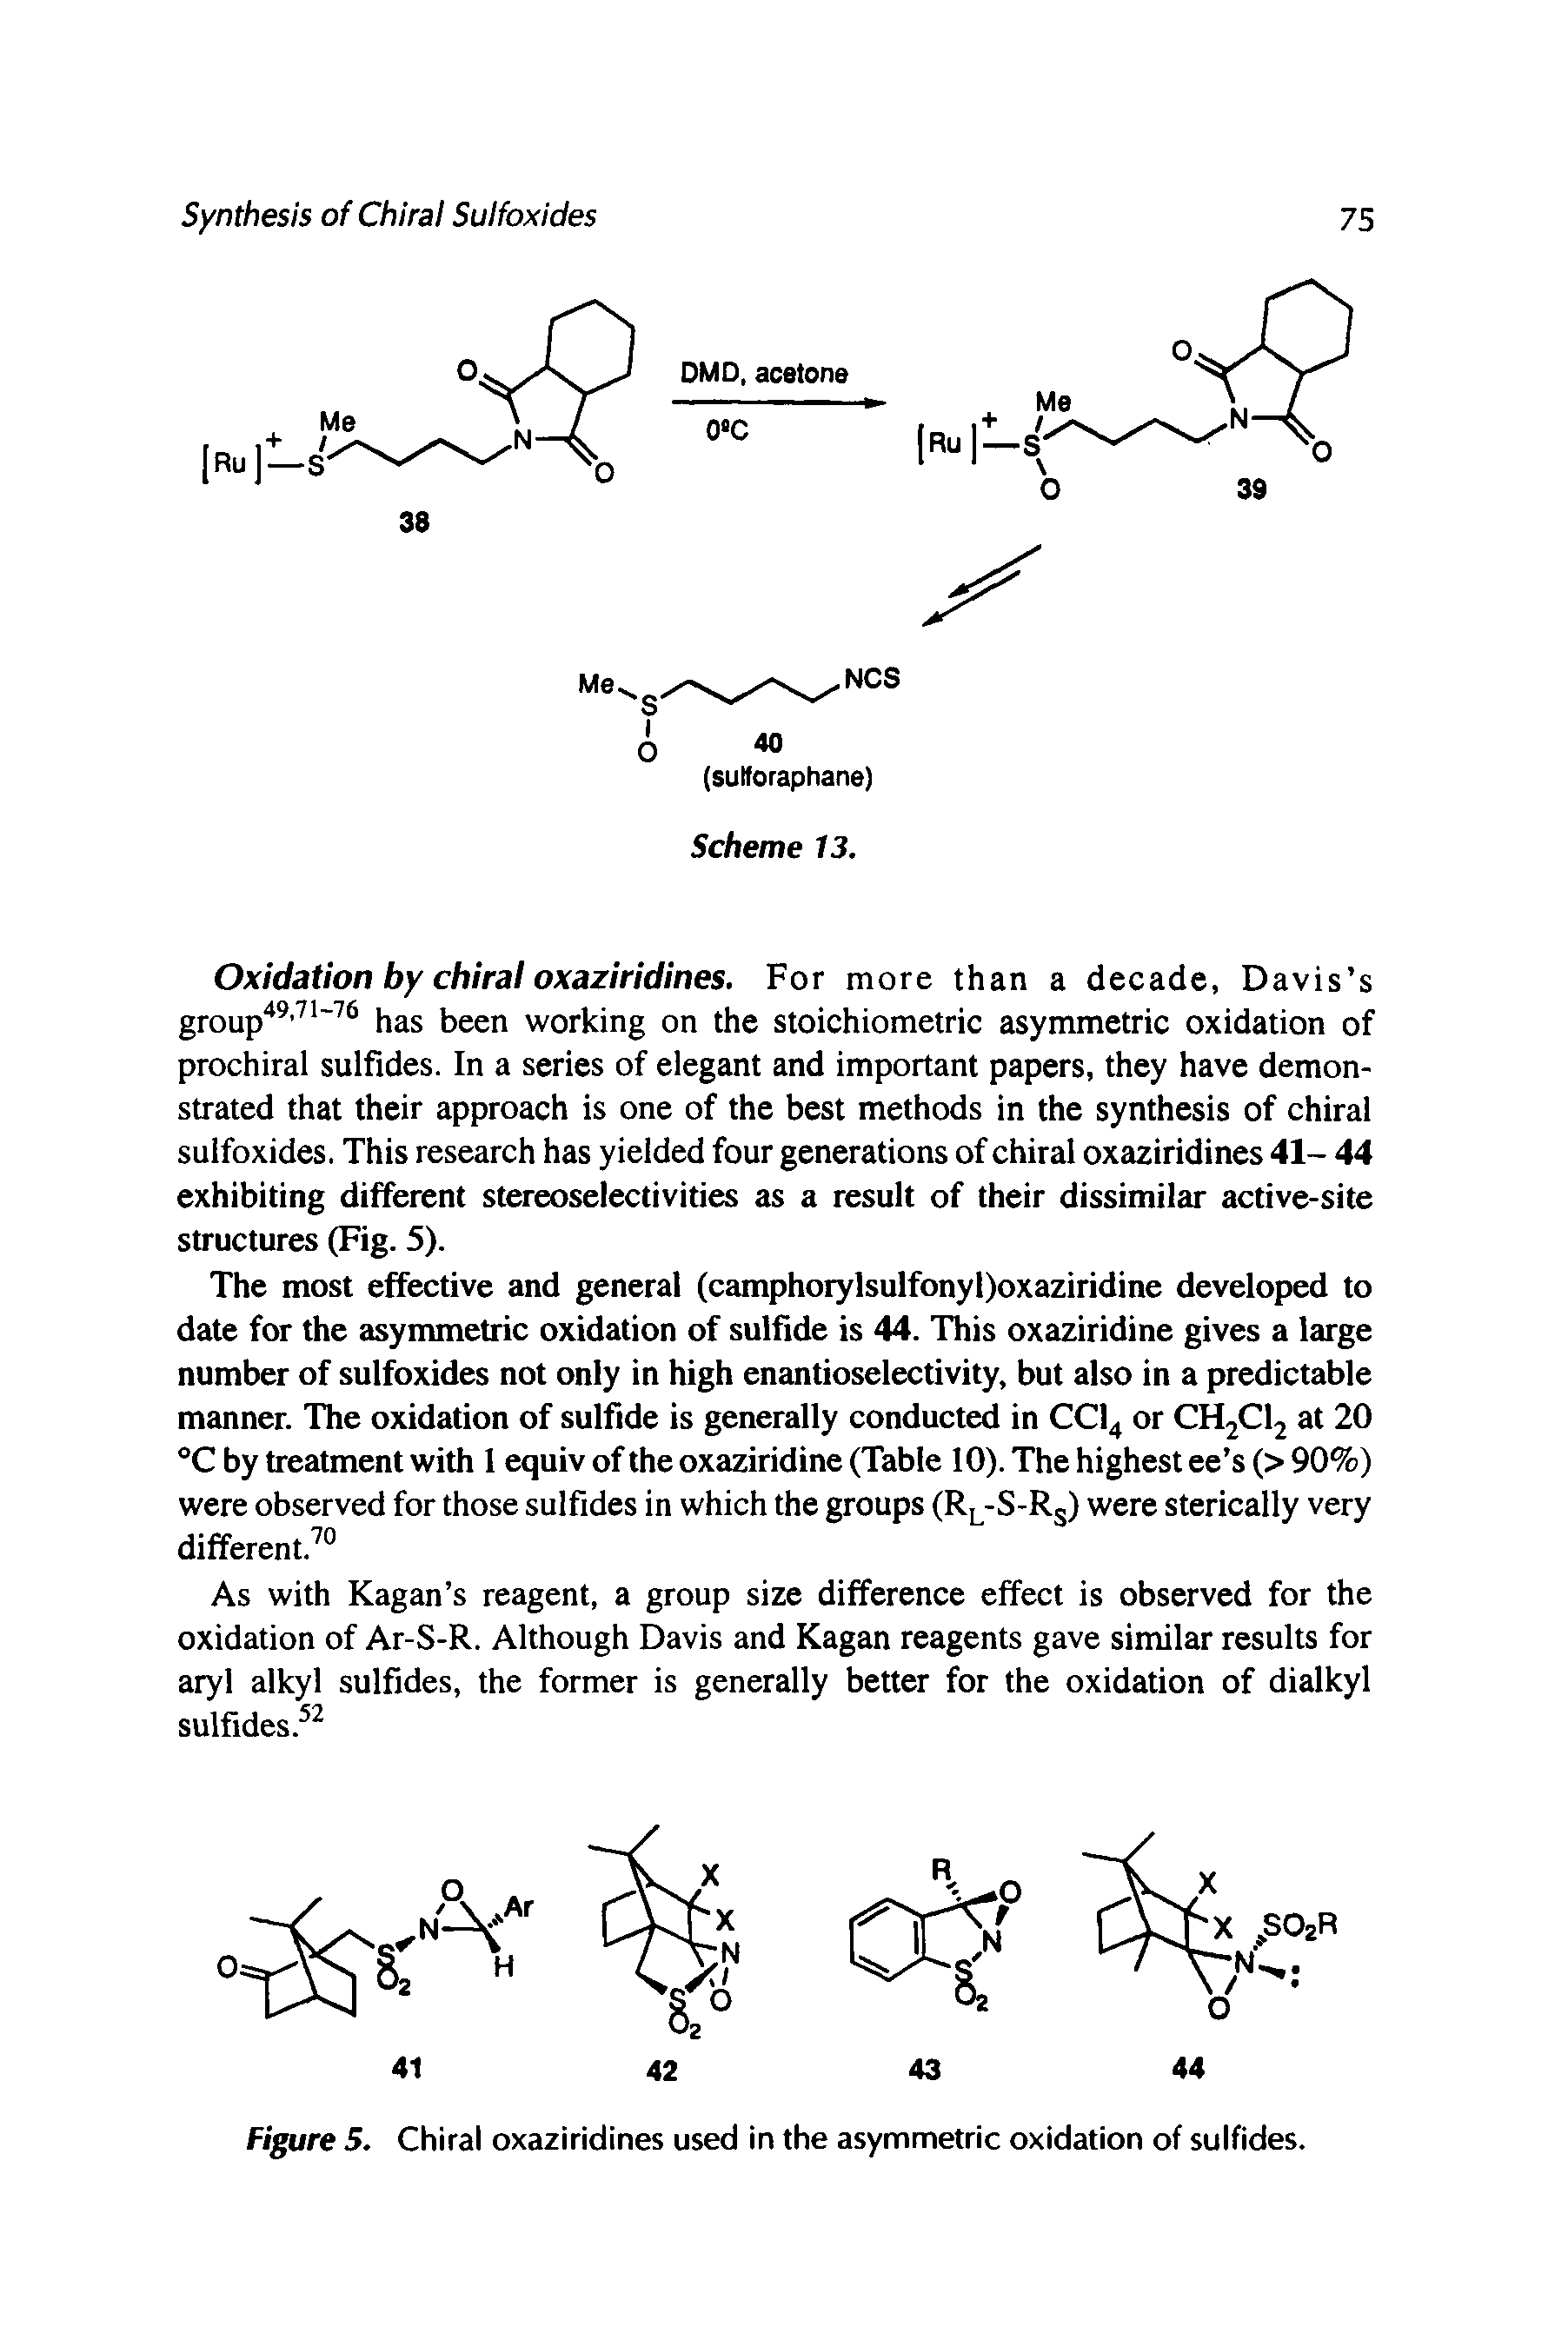 Figure 5. Chiral oxaziridines used in the asymmetric oxidation of sulfides.